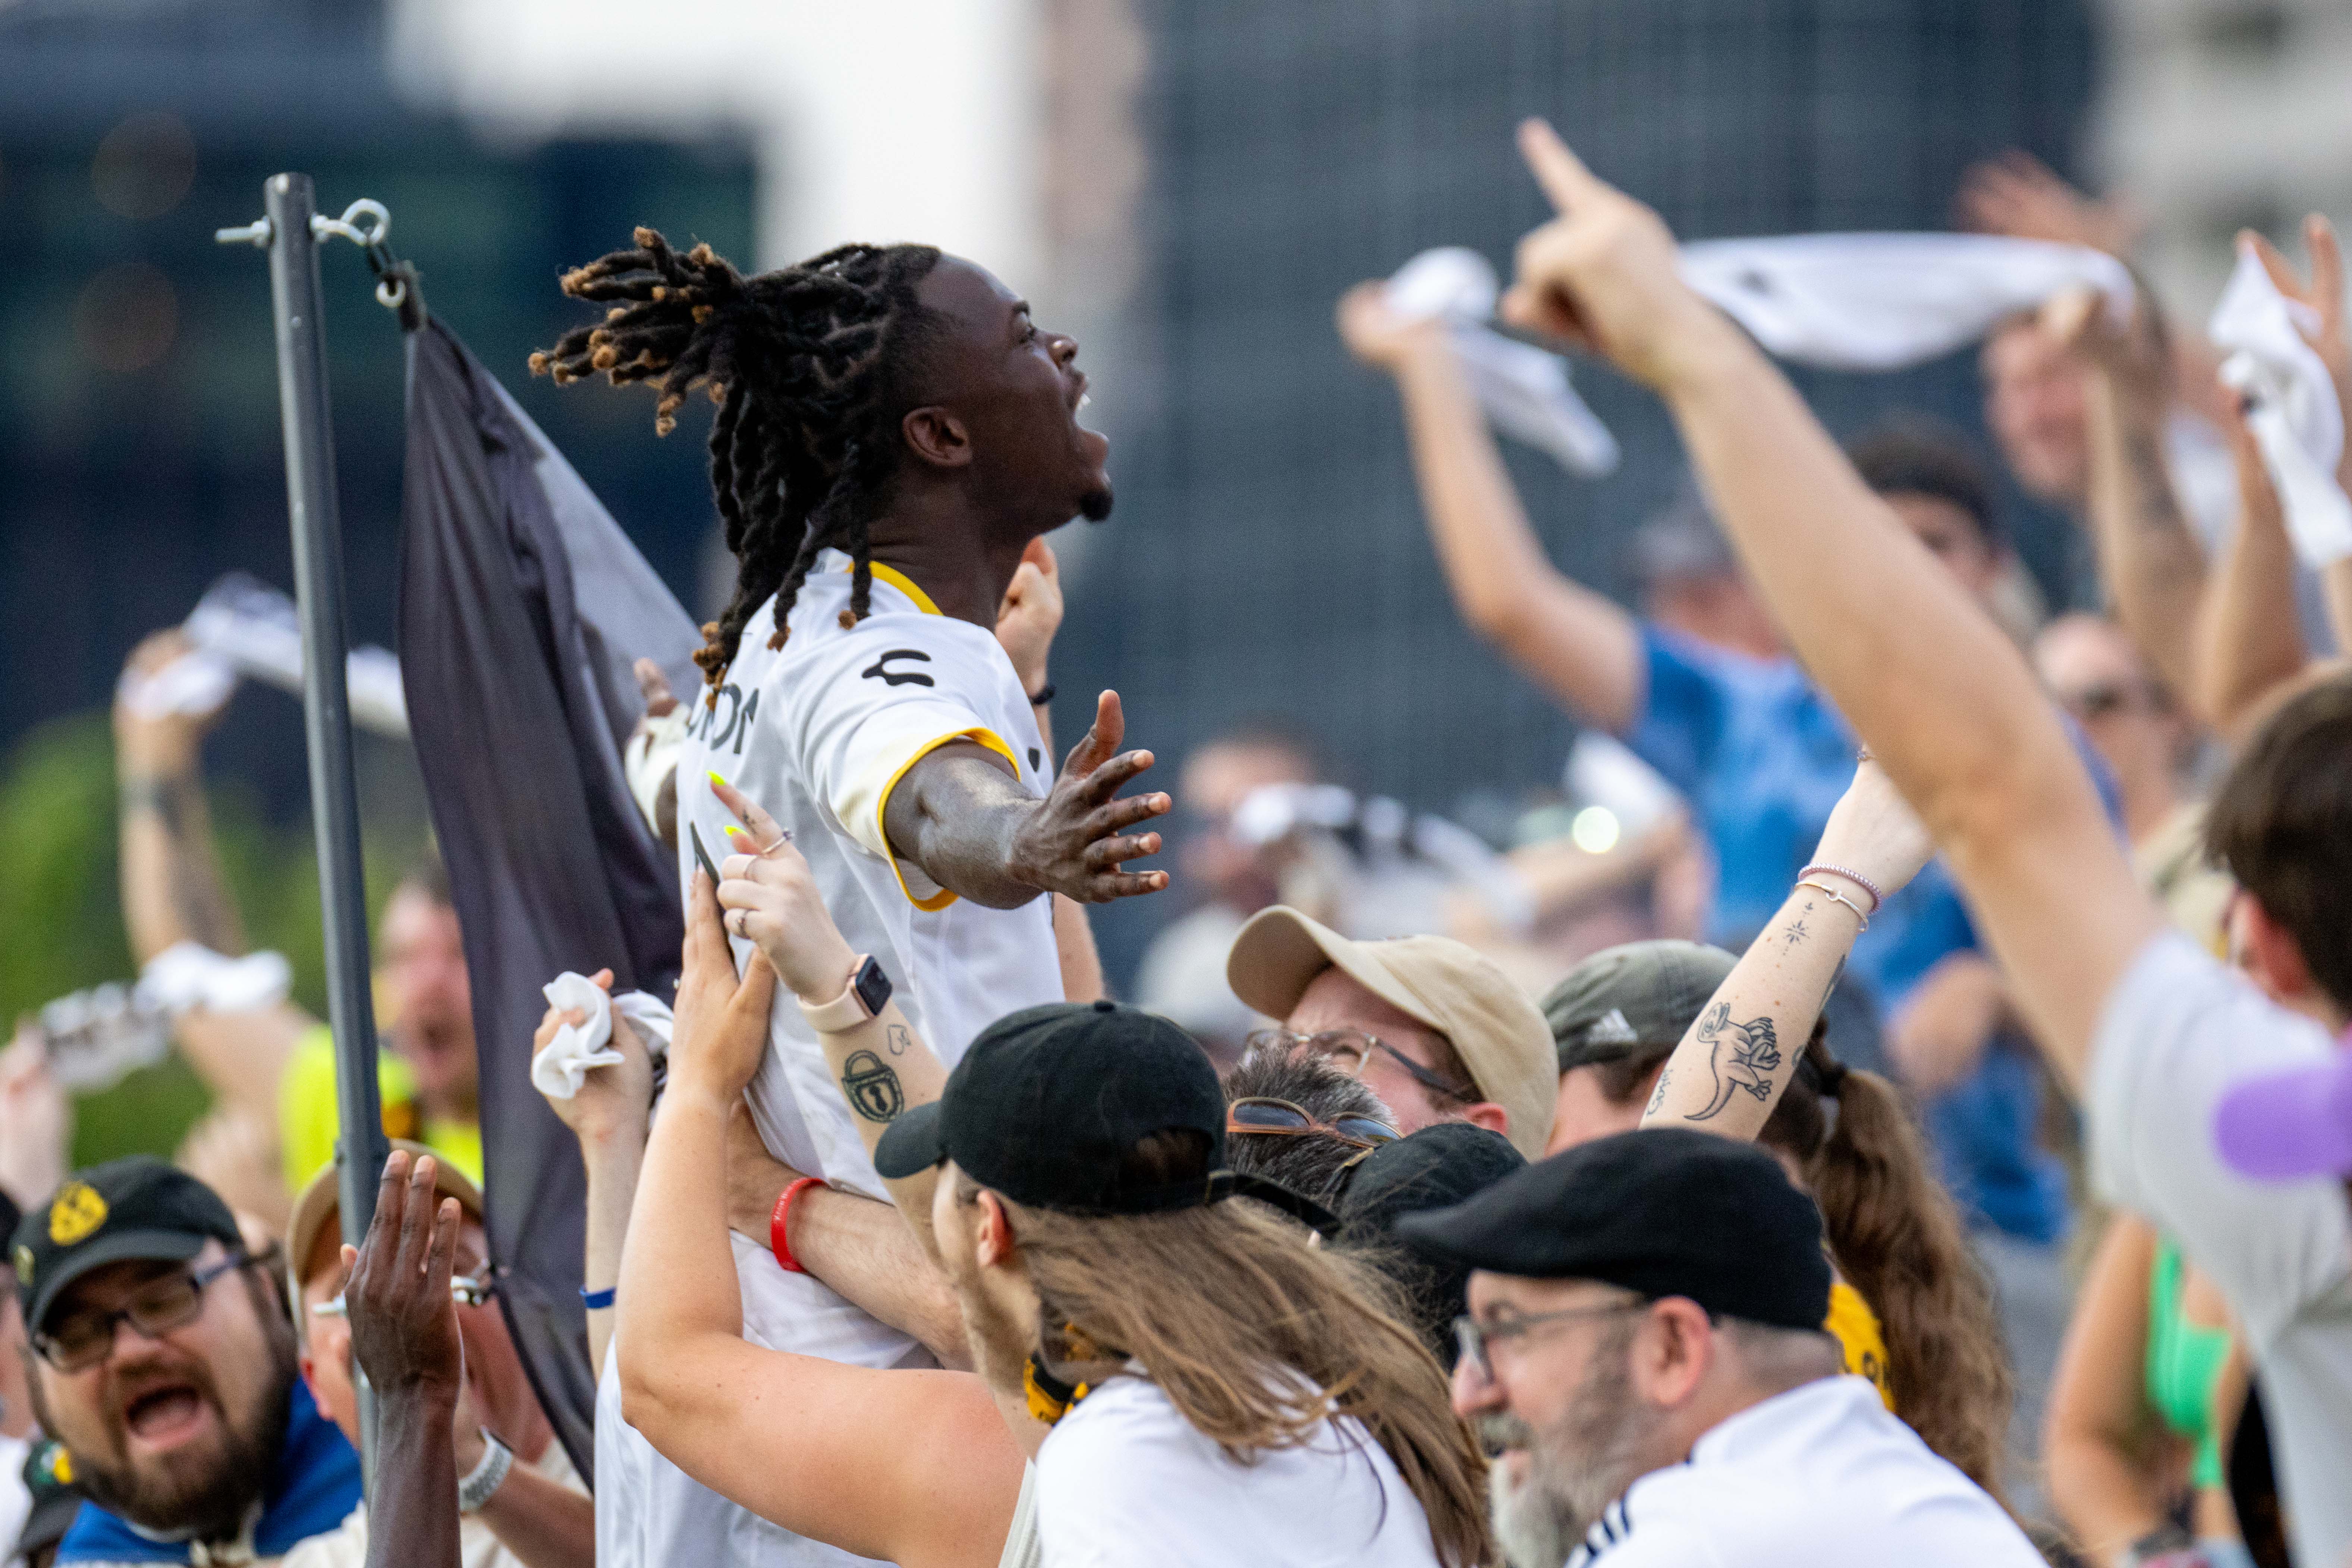 Emmanuel Johnson celebrates his first goal with the Riverhounds in the team's 3-1 win over Hartford Athletic on July 20, 2024 at Highmark Stadium. (Photo: Chris Cowger/Pittsburgh Riverhounds SC)